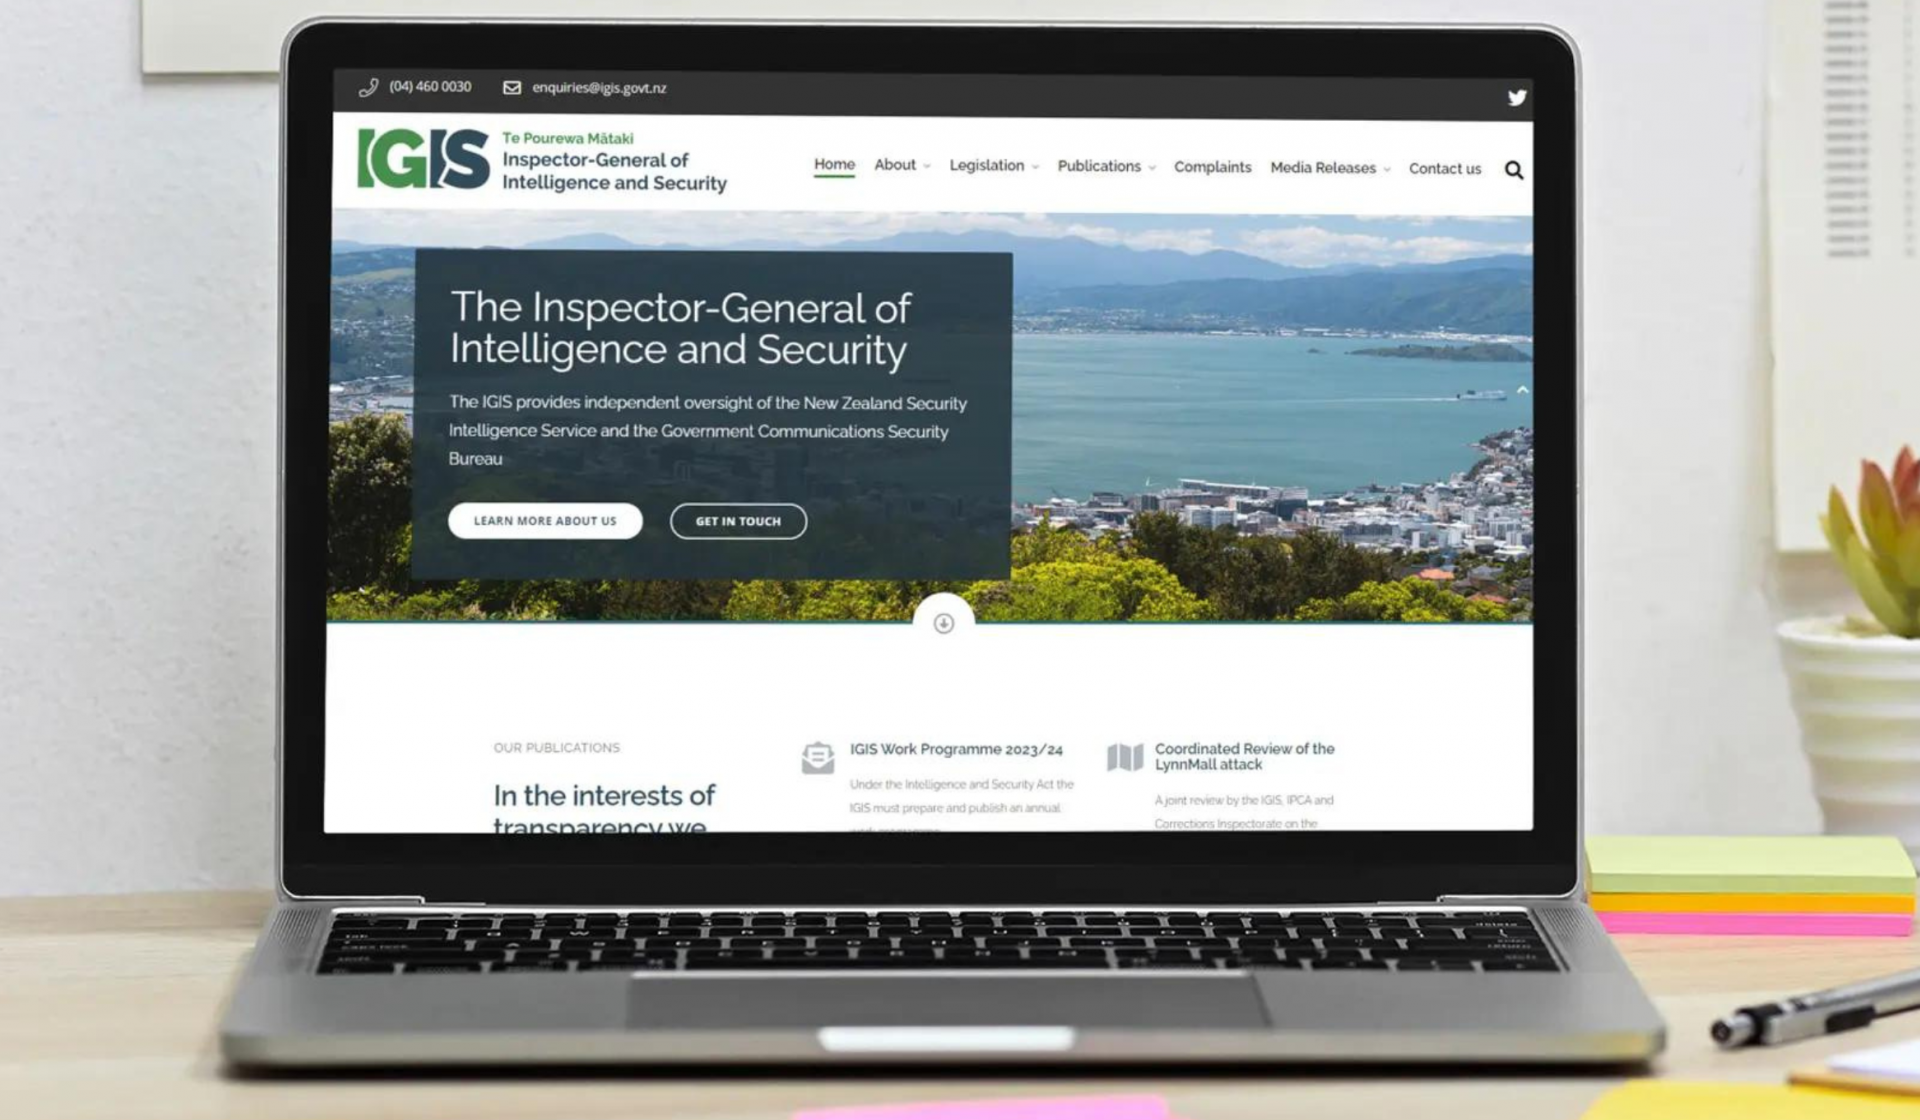 Laptop open on the IGIS Inspector General of Intelligence and Security homepage with the options to learn more or get in touch